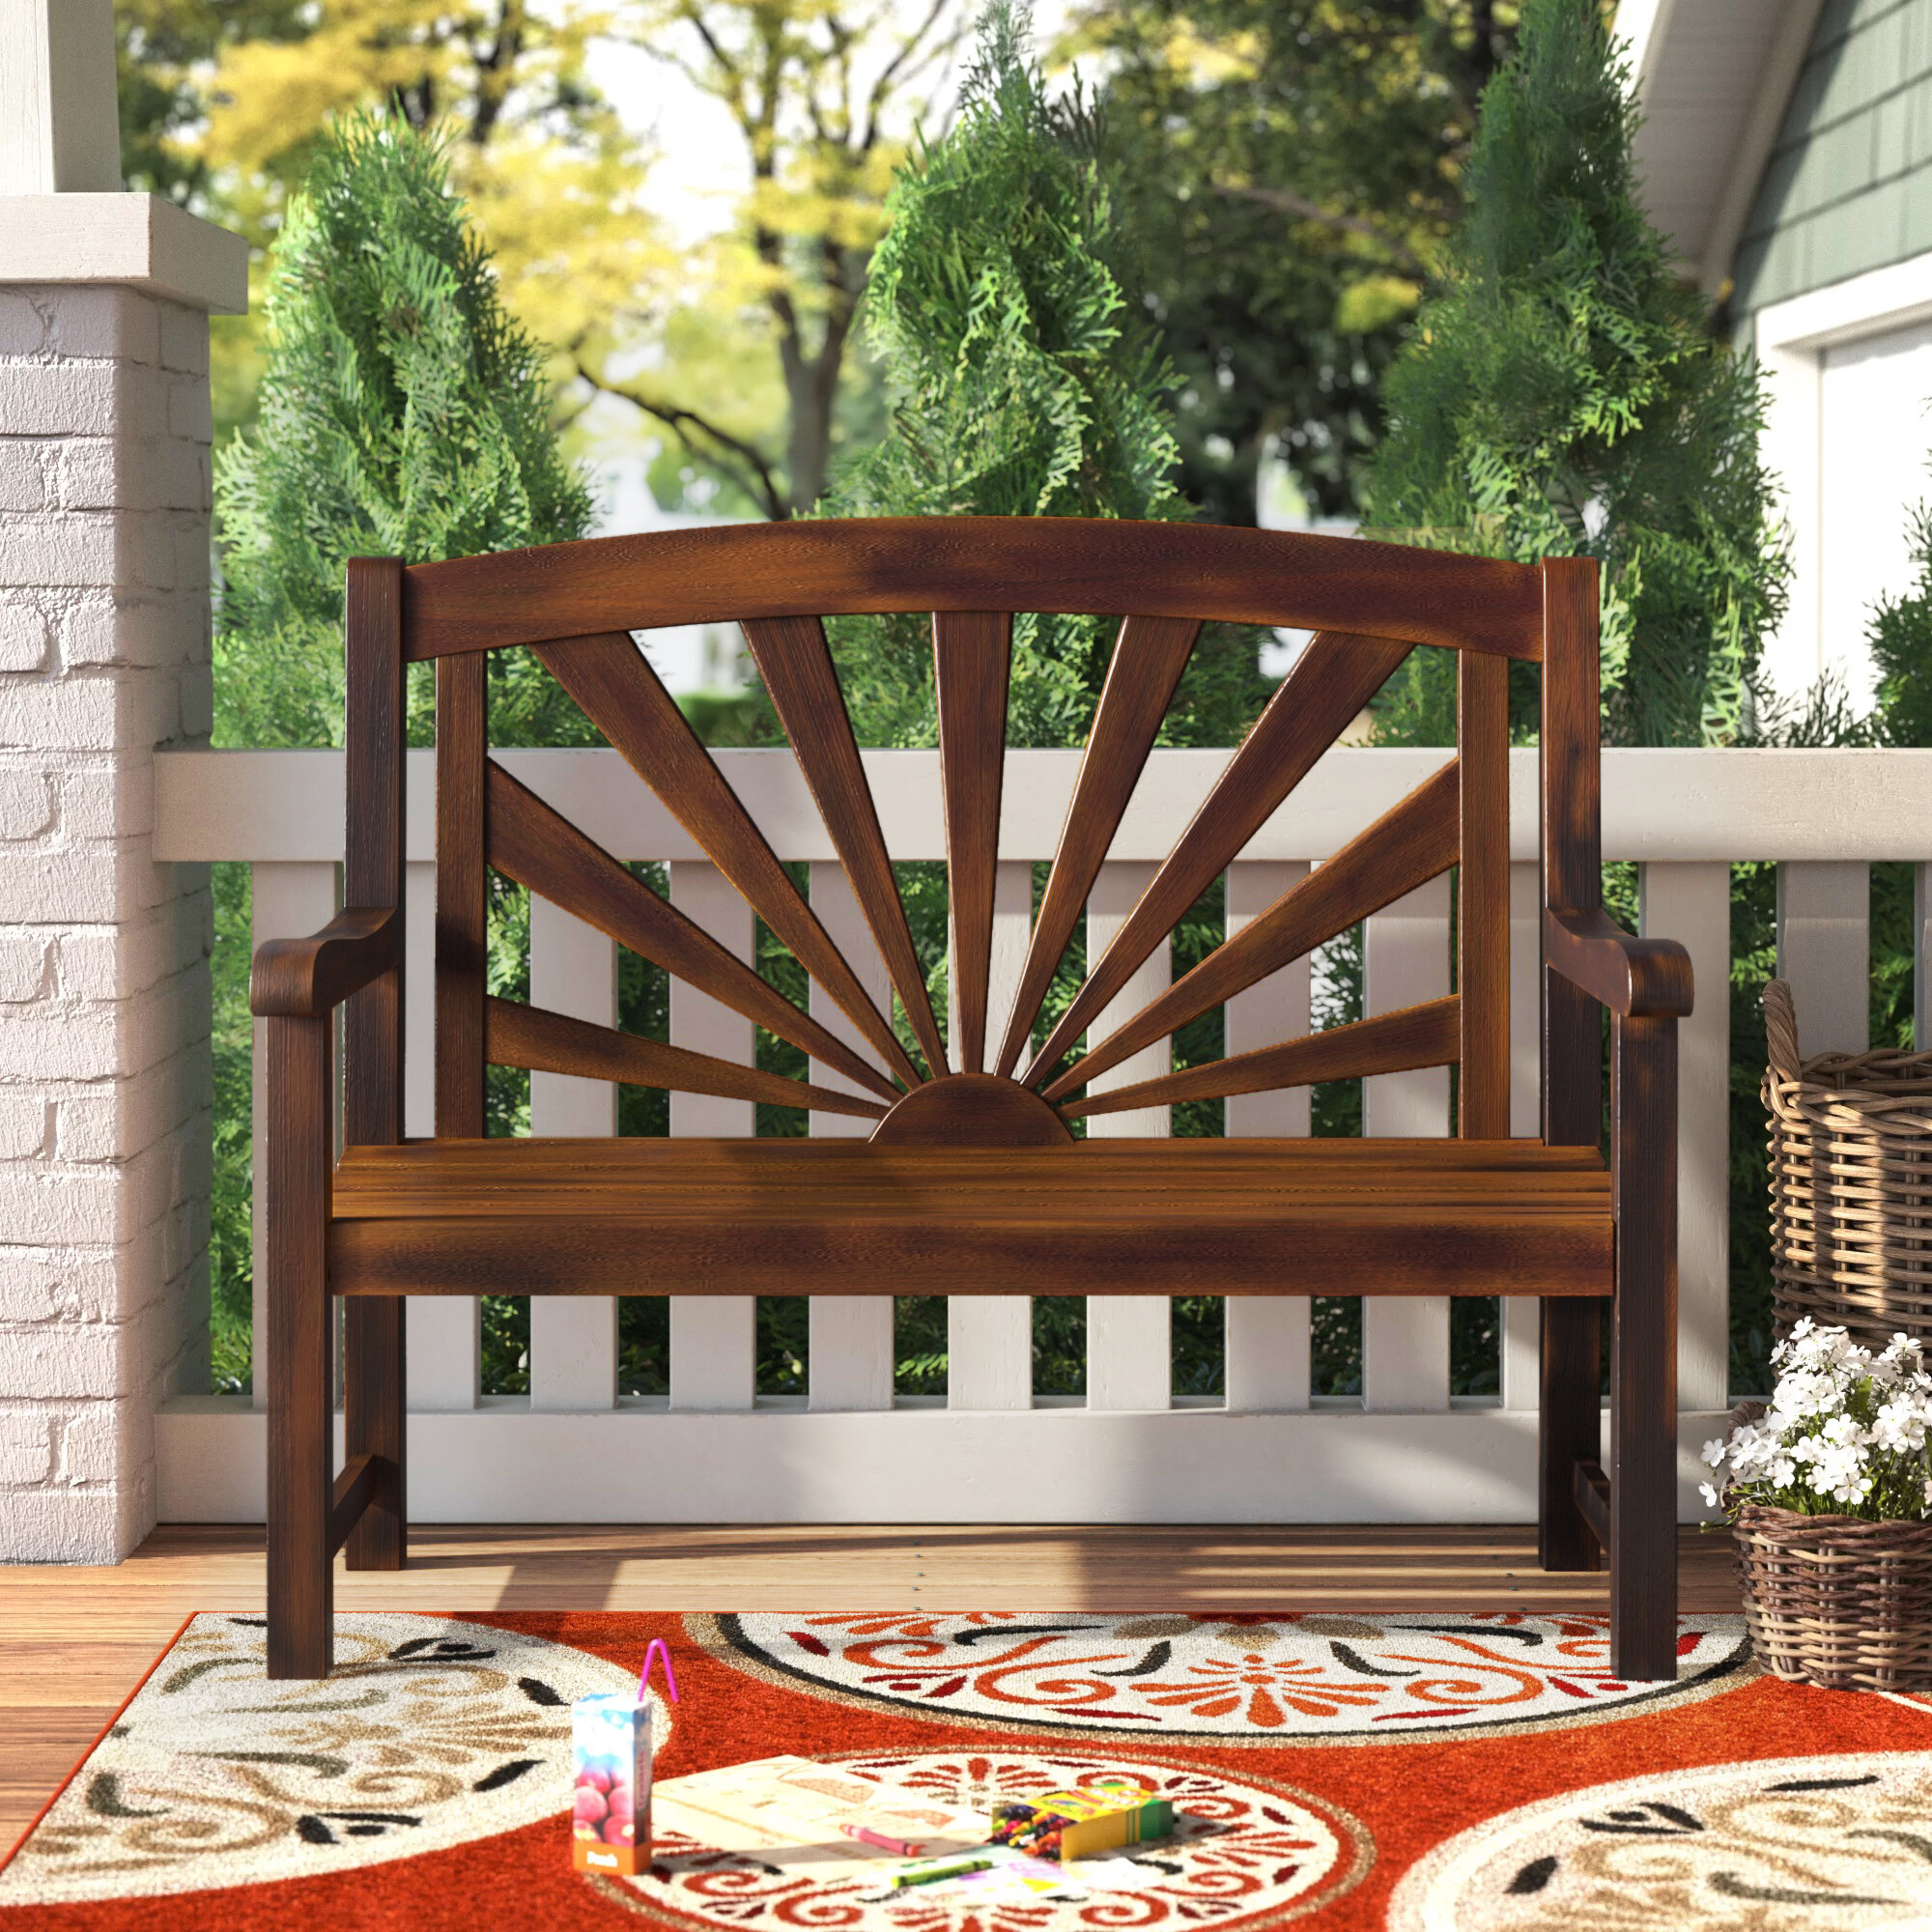 Outdoor Brown Finish Solid Wood Slatted Fire Pit Bench Lawn Garden Furniture 